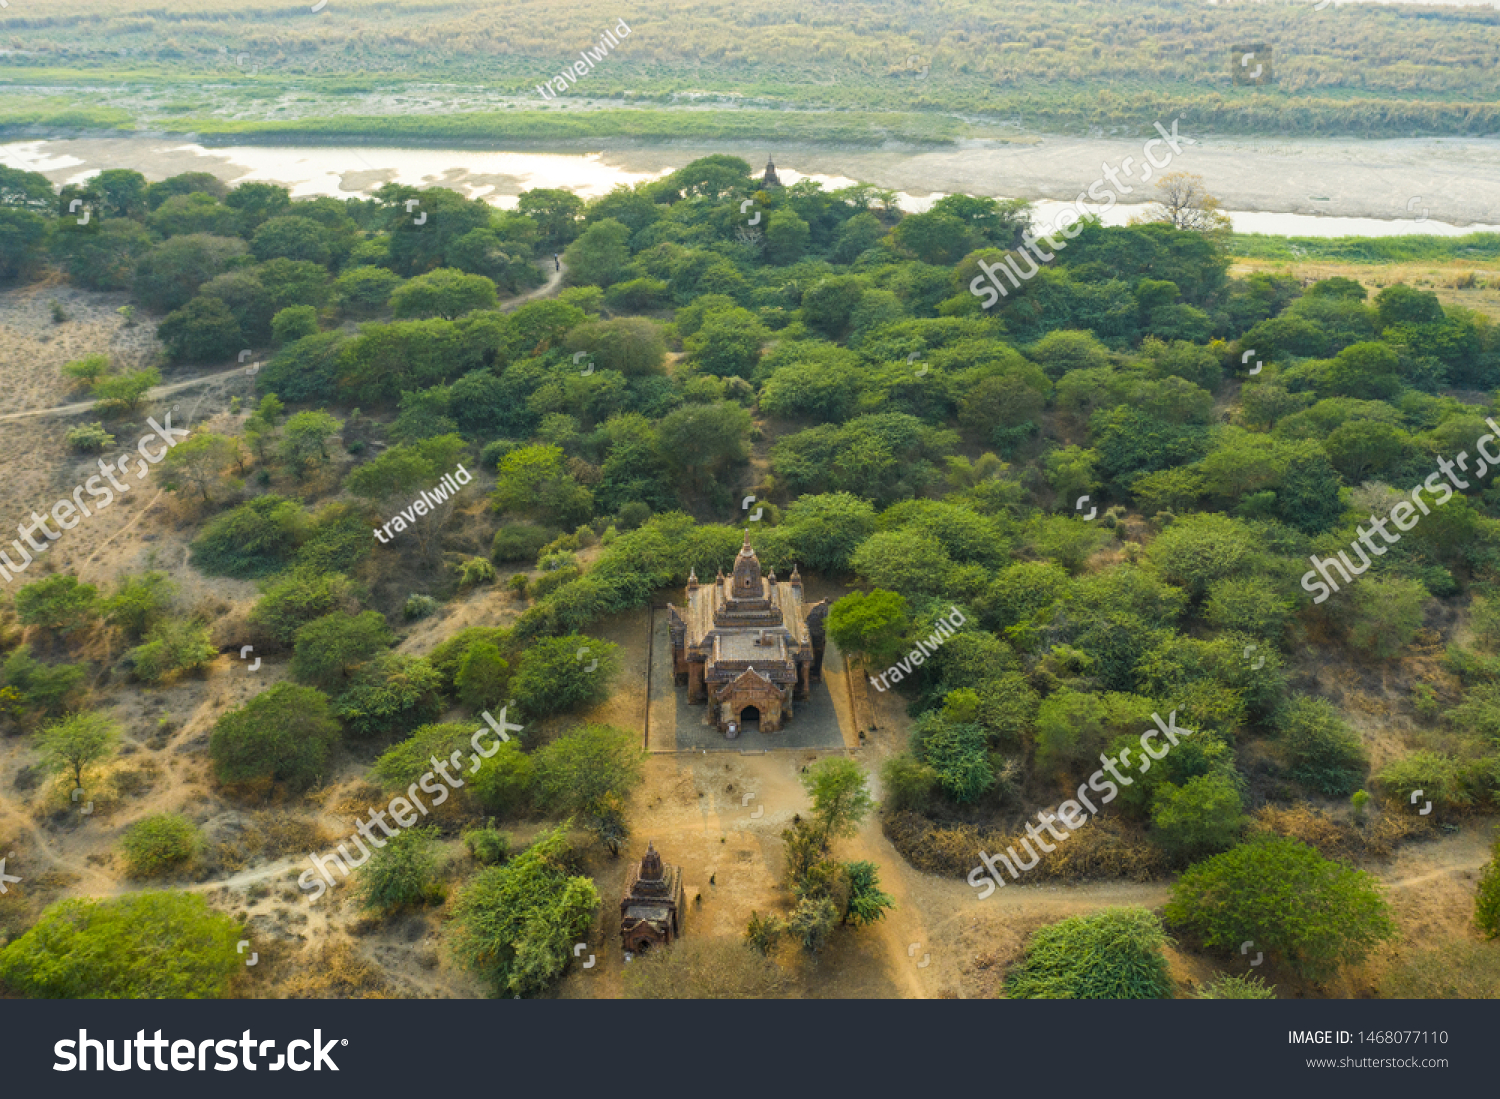 View from above, stunning aerial view of the beautiful Bagan Archaeological Zone (formerly Pagan) during sunset. Drone picture over hundreds of temples surrounded green rich vegetation, Myanmar. #1468077110